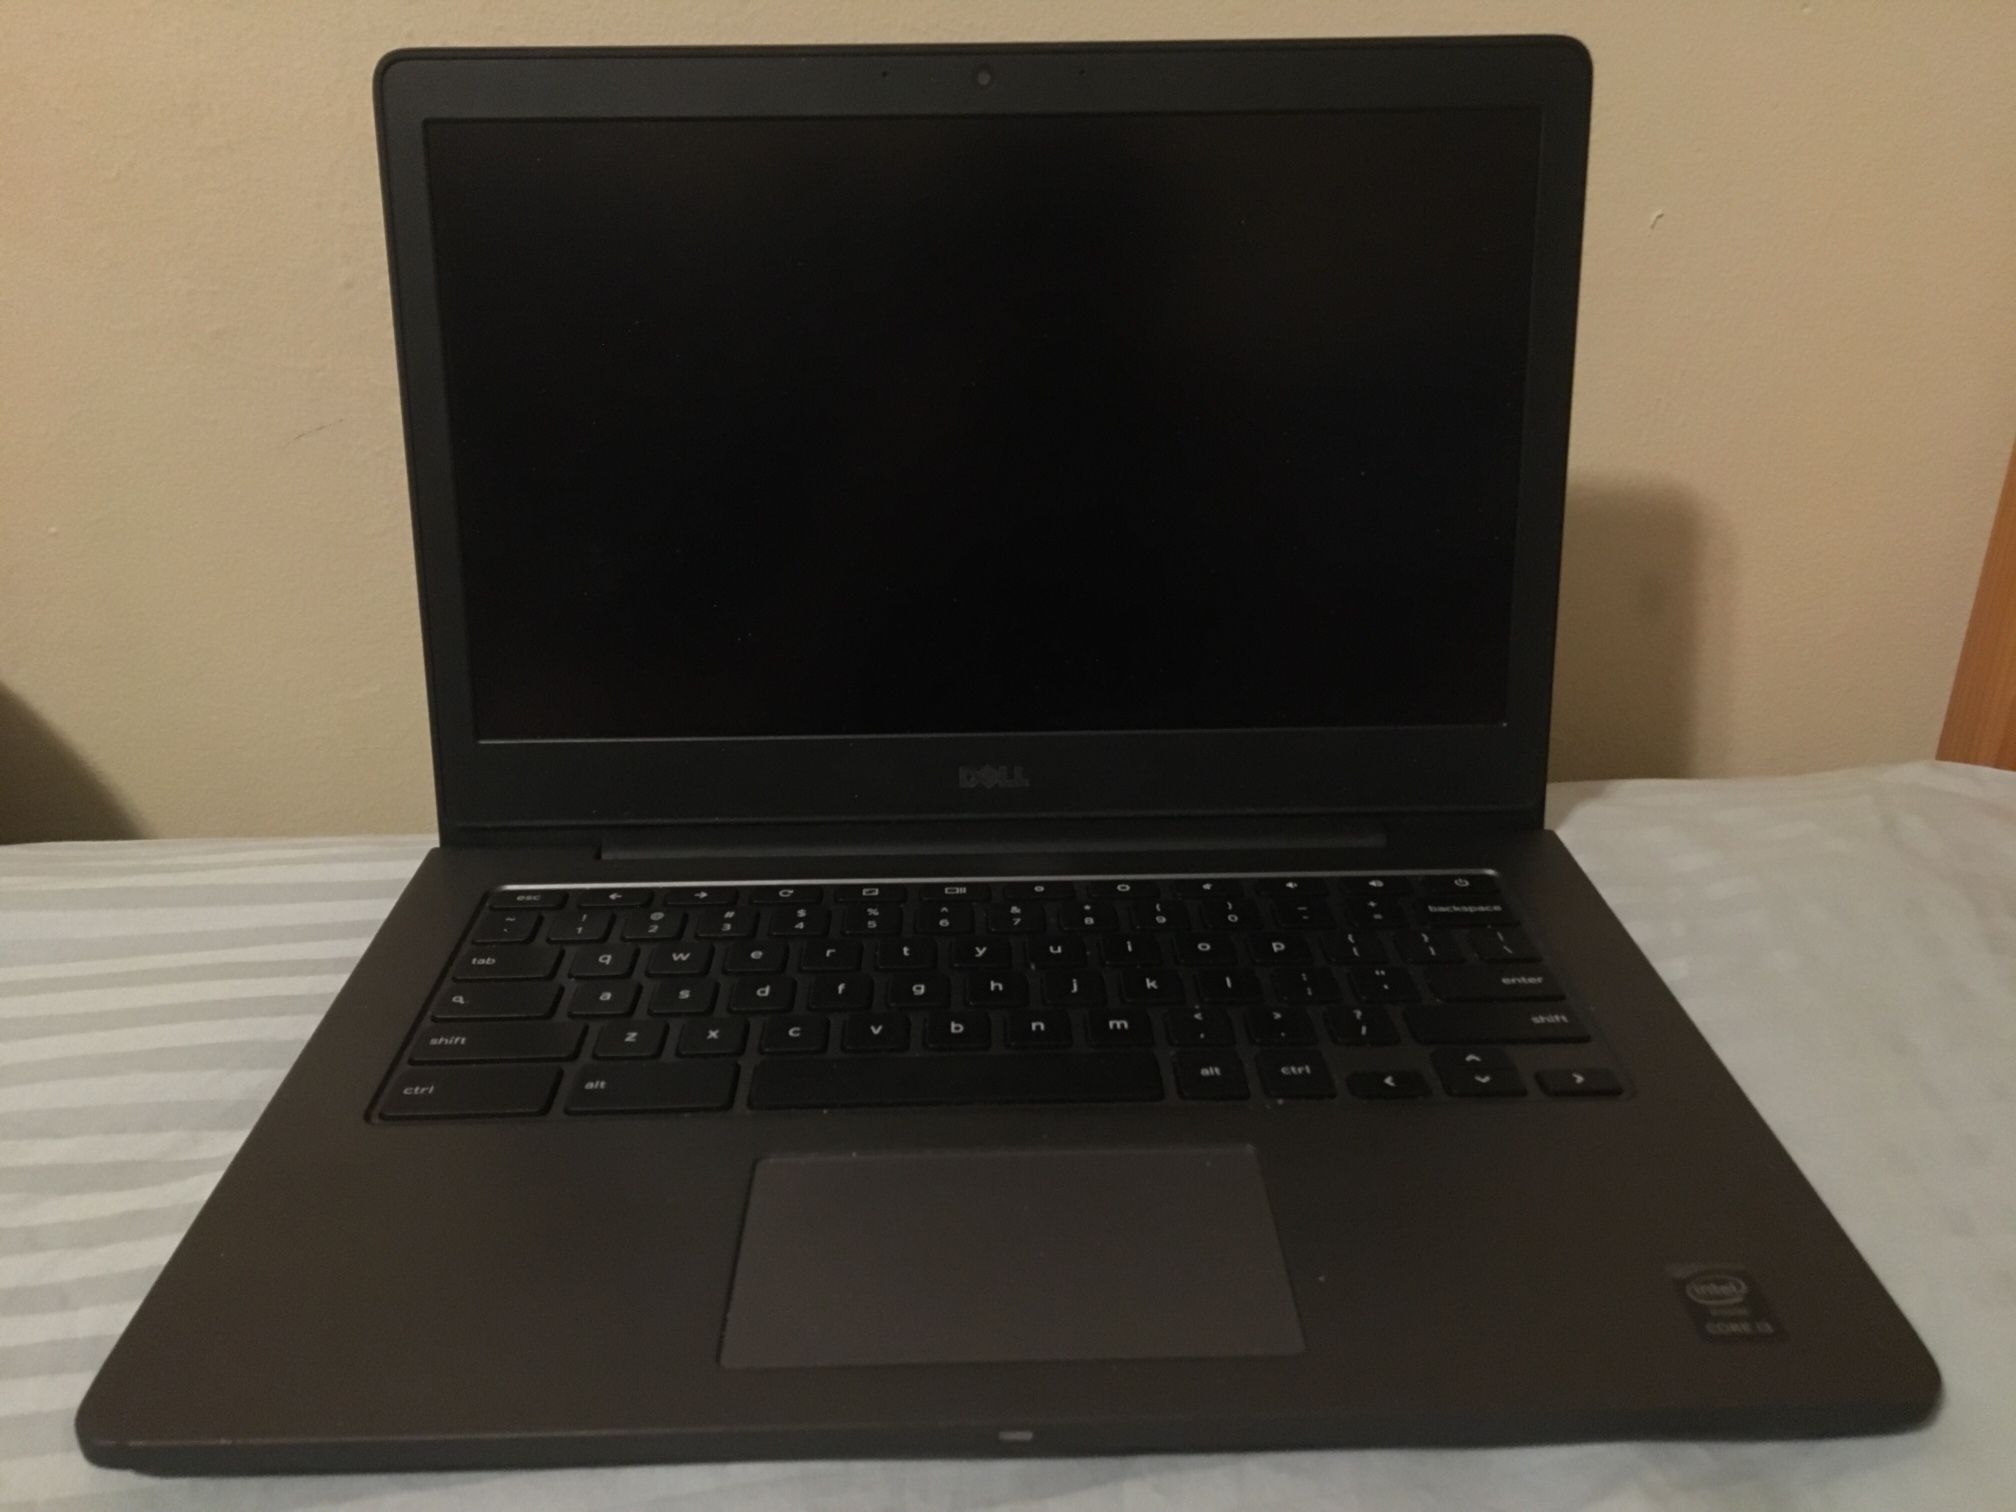 Dell Chromebook 13 turned to Windows 10 ultrabook i3 laptop